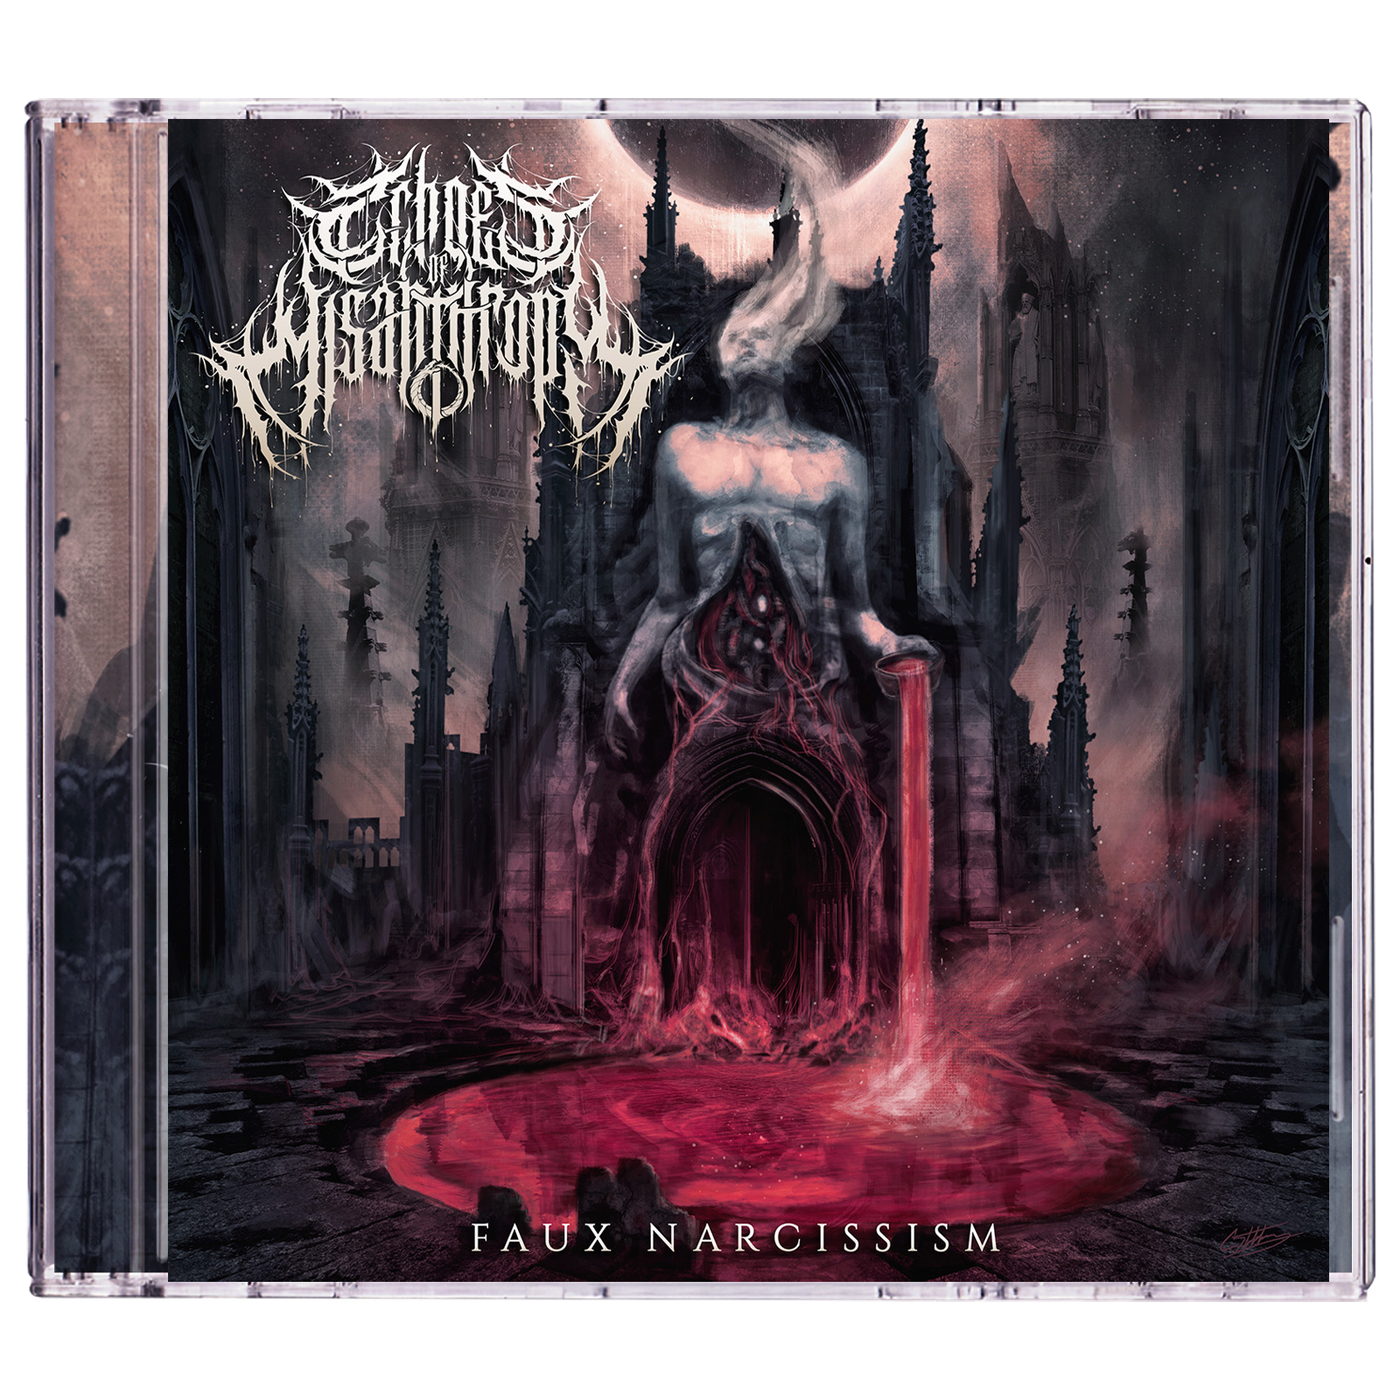 Echoes Of Misanthropy 'Faux Narcissism' CD